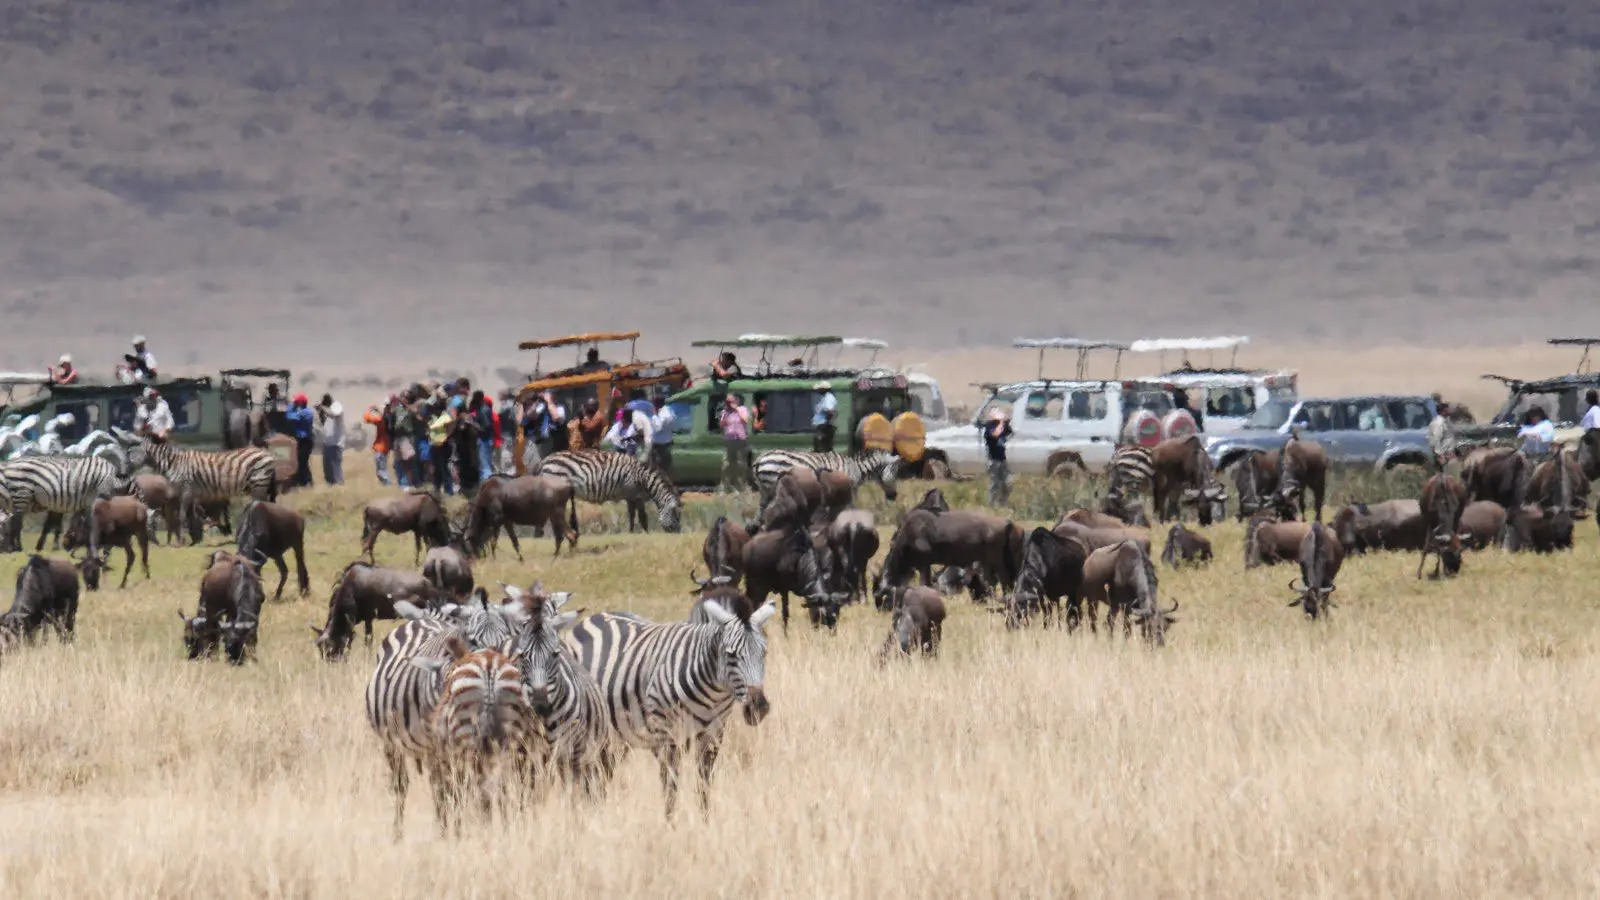 How to Outsmart Overtourism: 5 Tips for Responsible Travel, Game Viewing